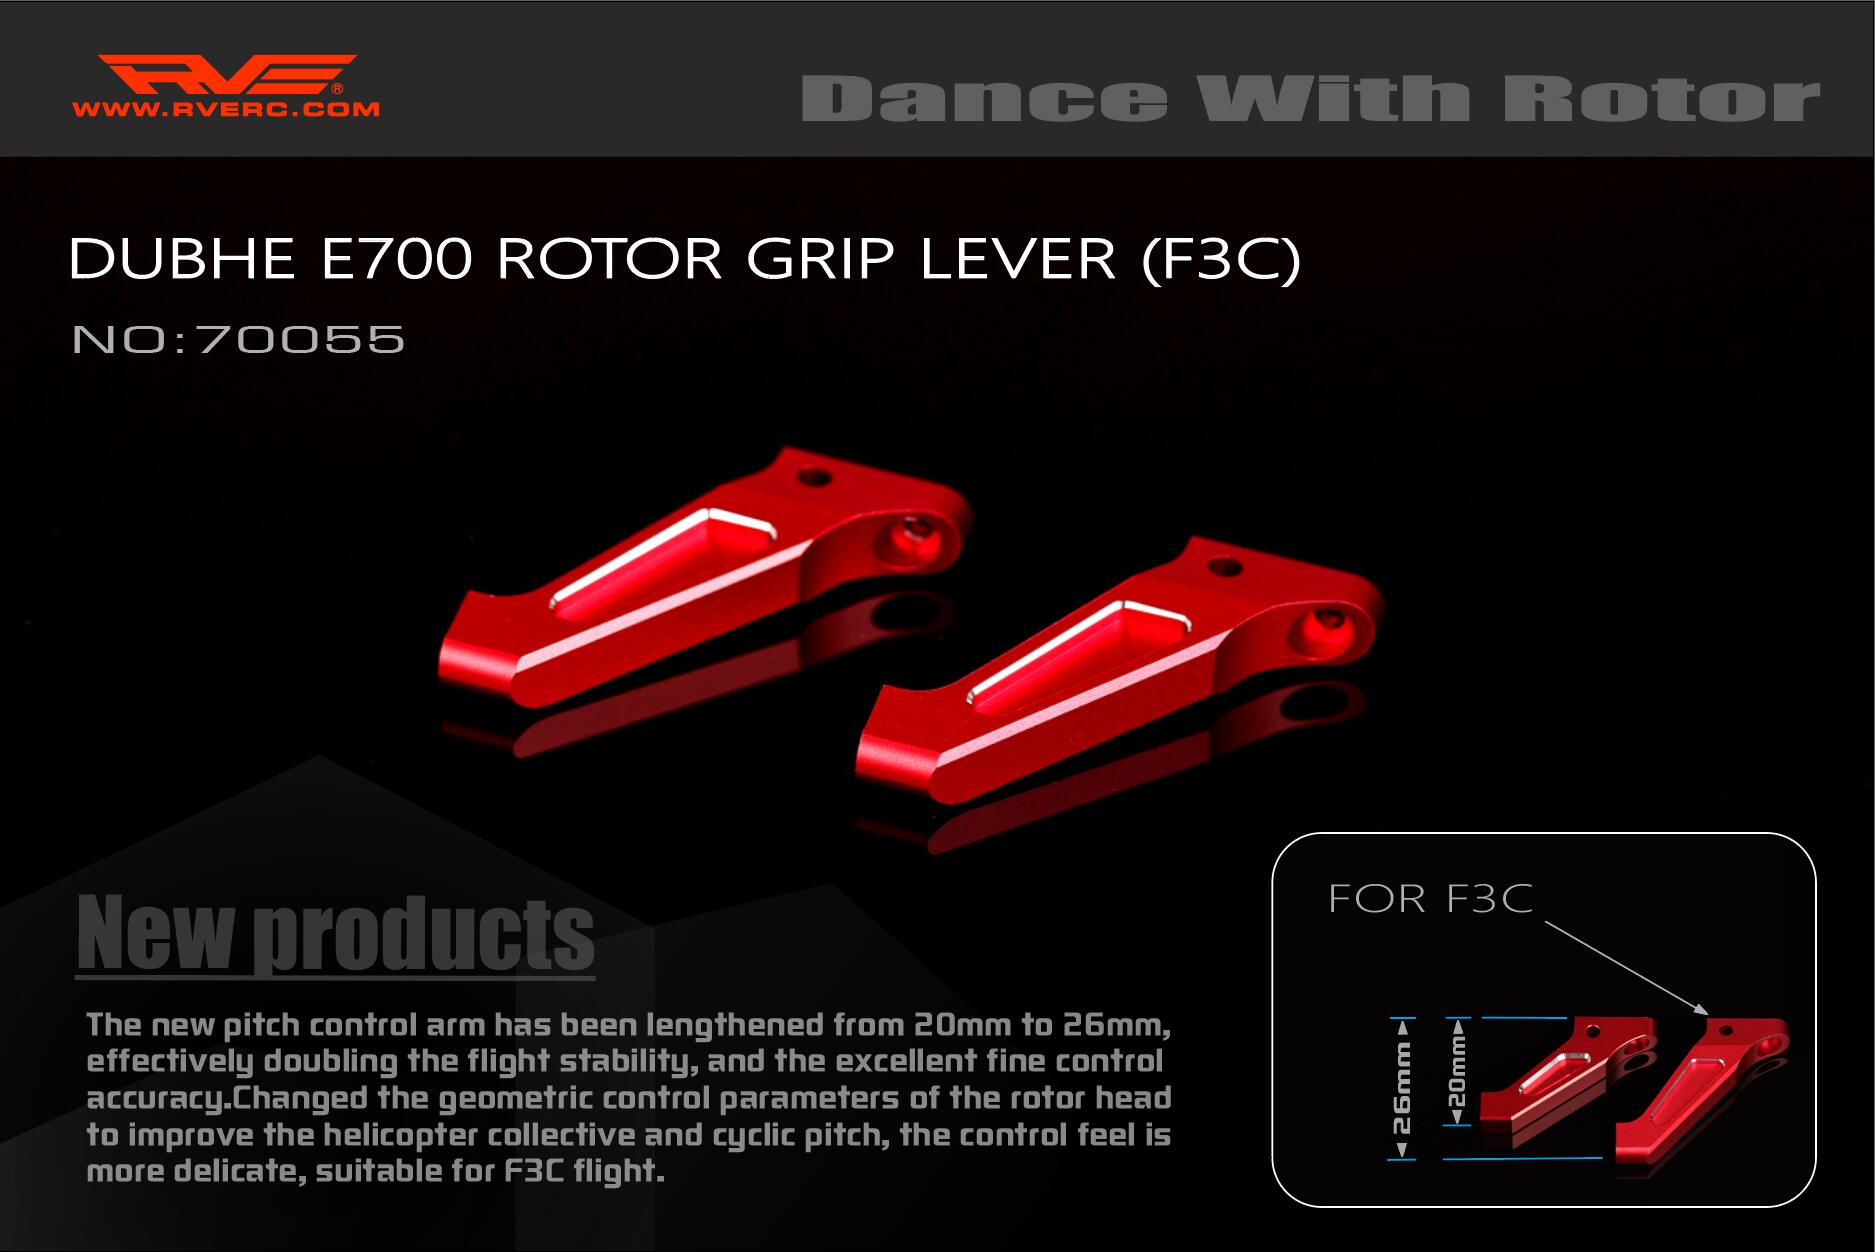 DUBHE ROTOR GRIP LEVER(F3C) is coming(图1)